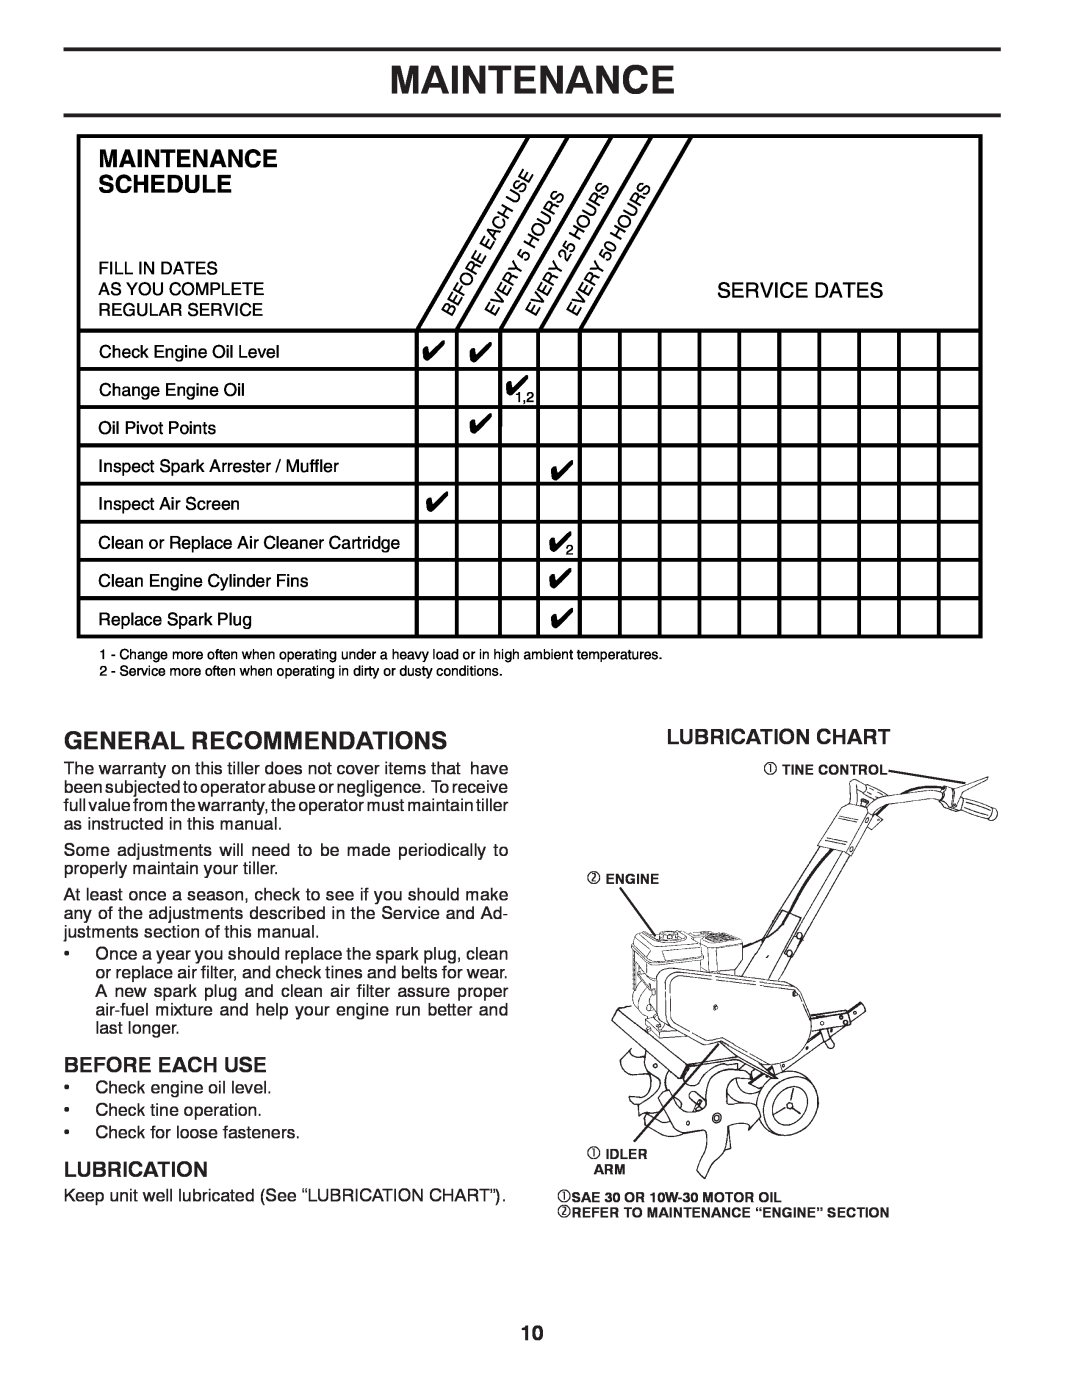 McCulloch 532 43 36-95, MHDF800 manual Maintenance, General Recommendations, Service Dates, Before Each Use, Lubrication 